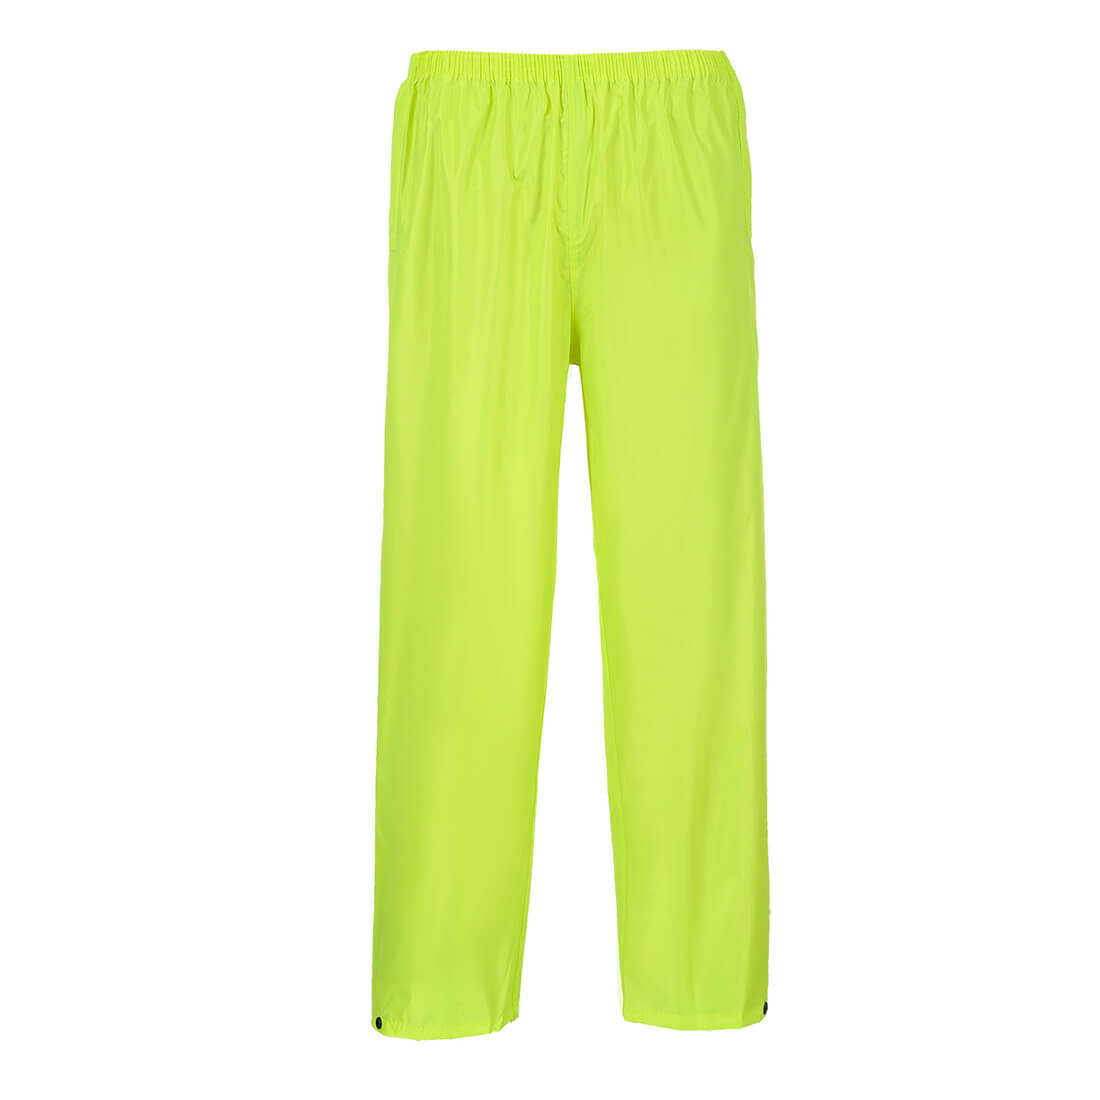 Image of Portwest Classic Rain Trousers Yellow 6XL